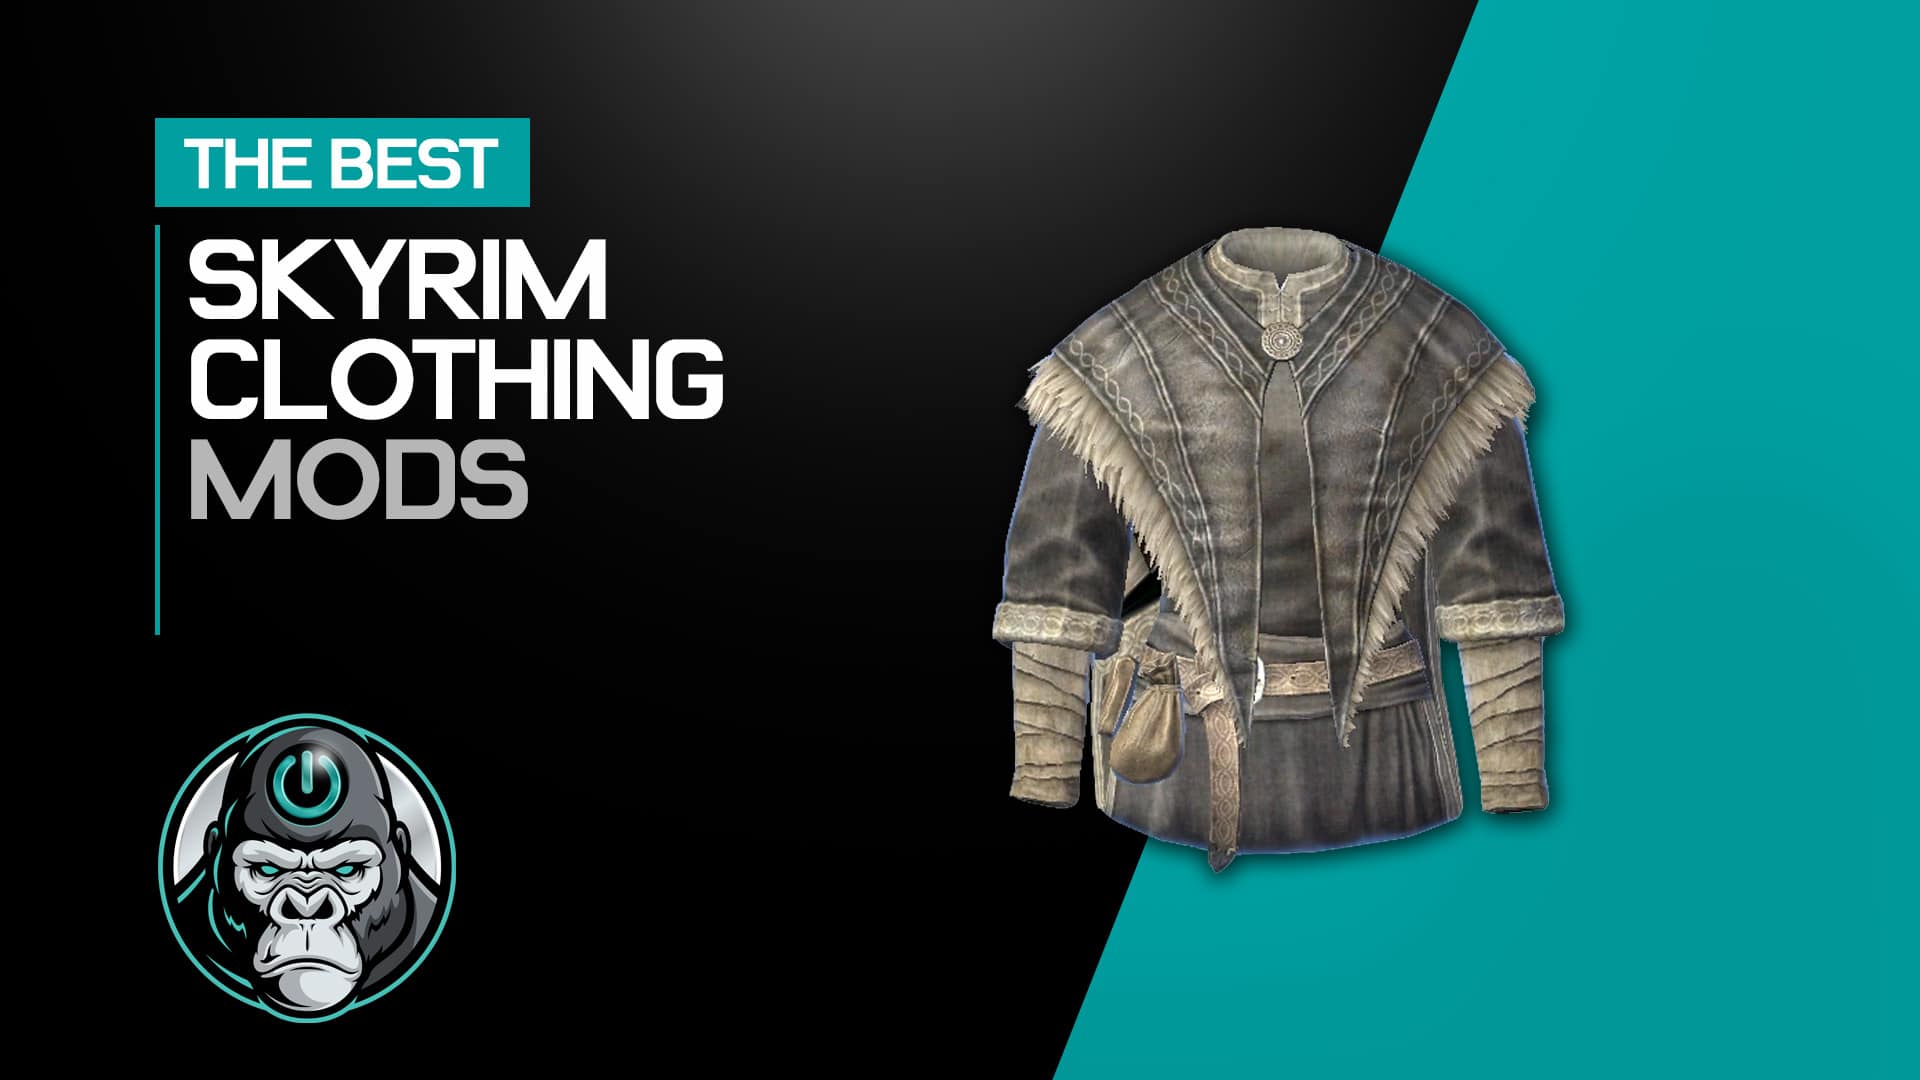 The Best Skyrim Clothing Mods